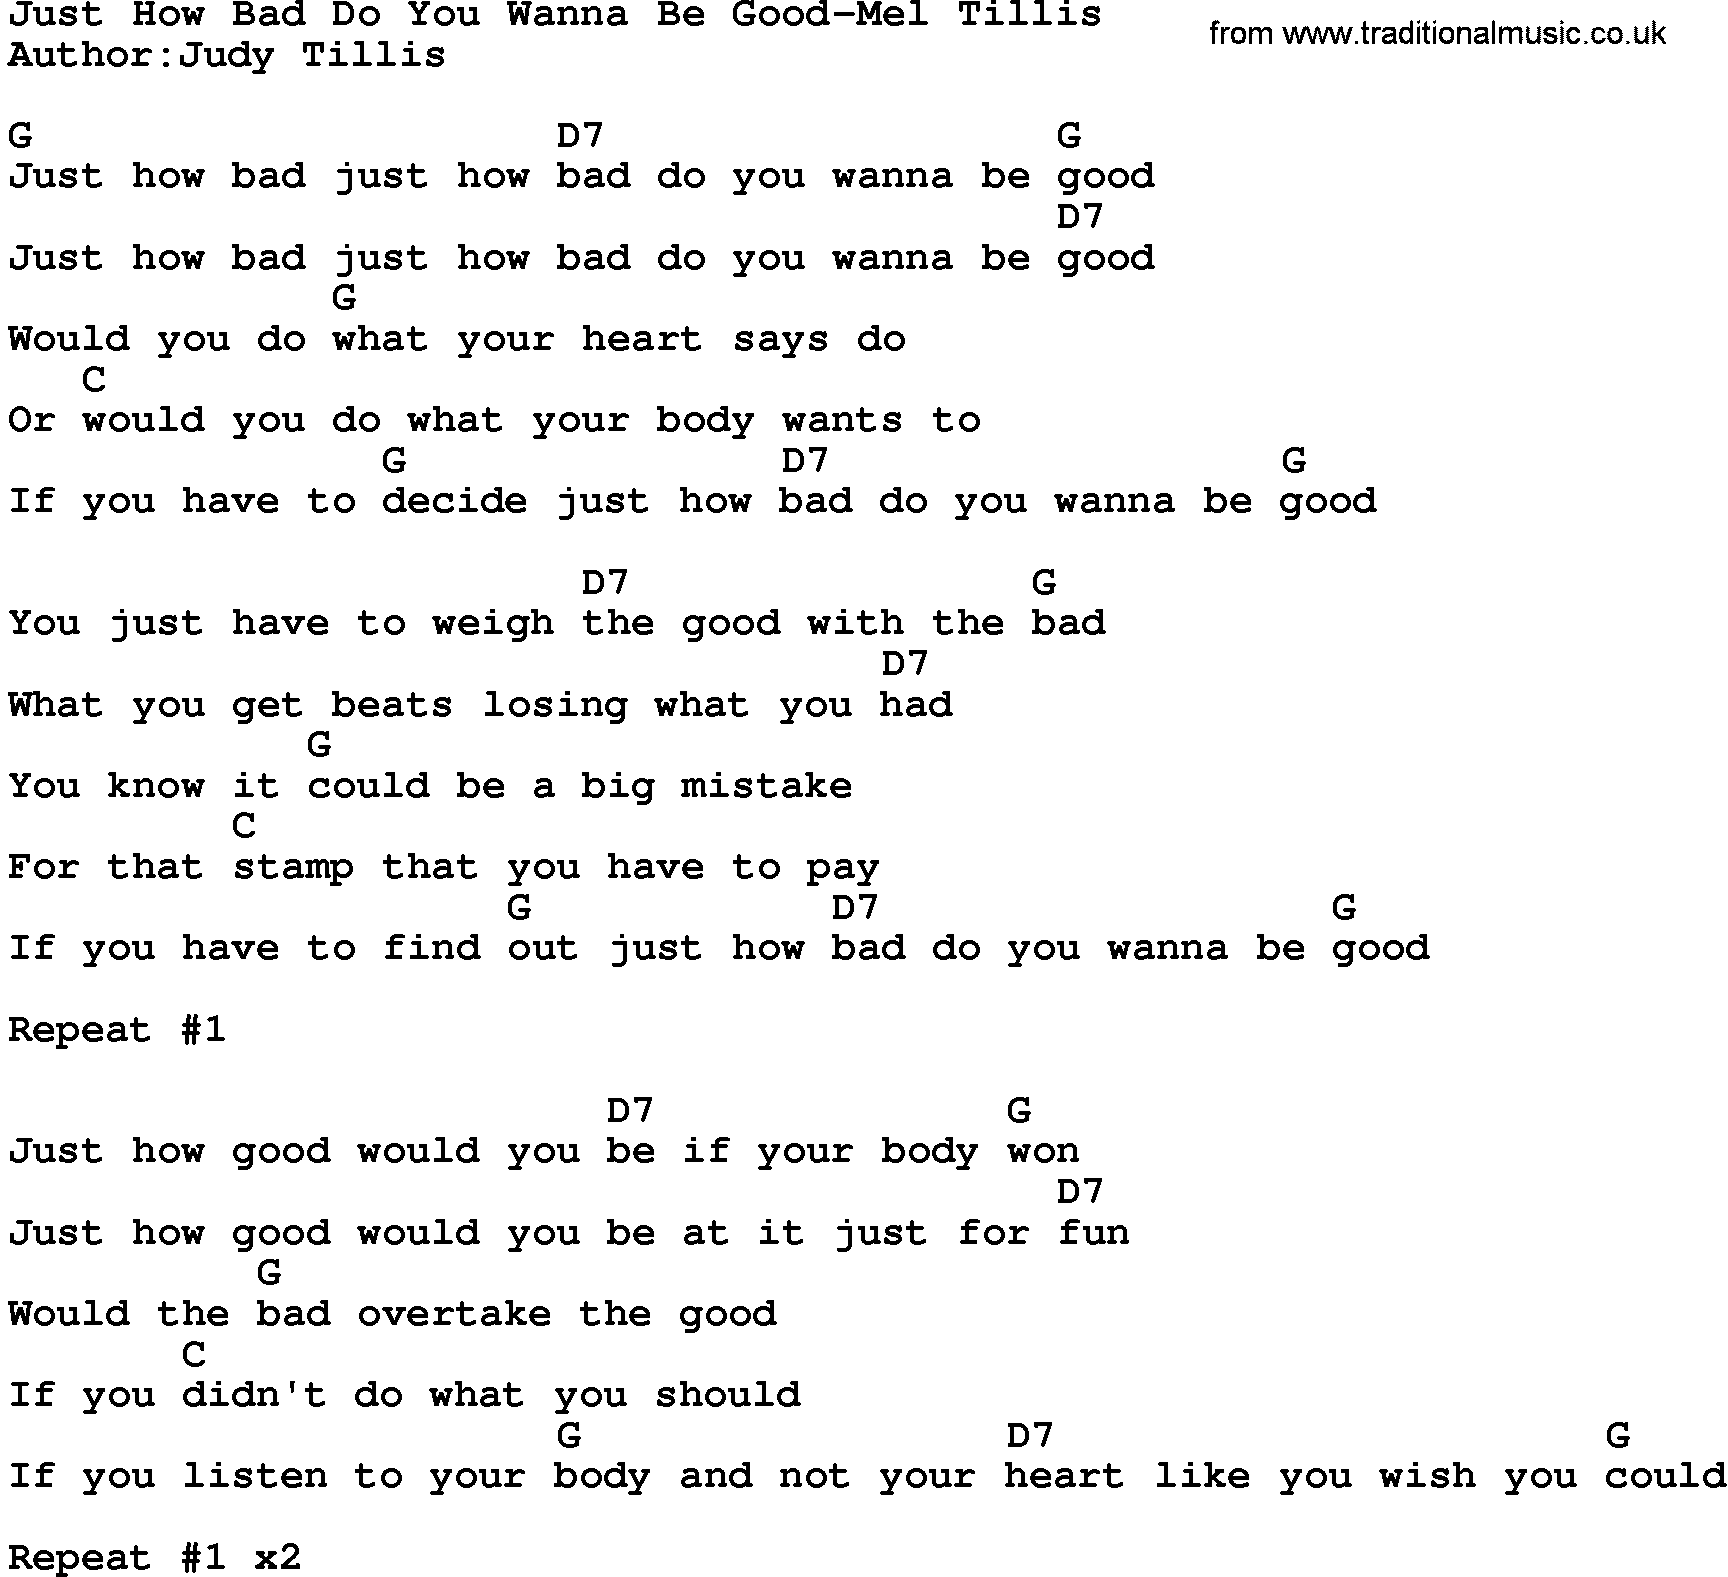 Country music song: Just How Bad Do You Wanna Be Good-Mel Tillis lyrics and chords